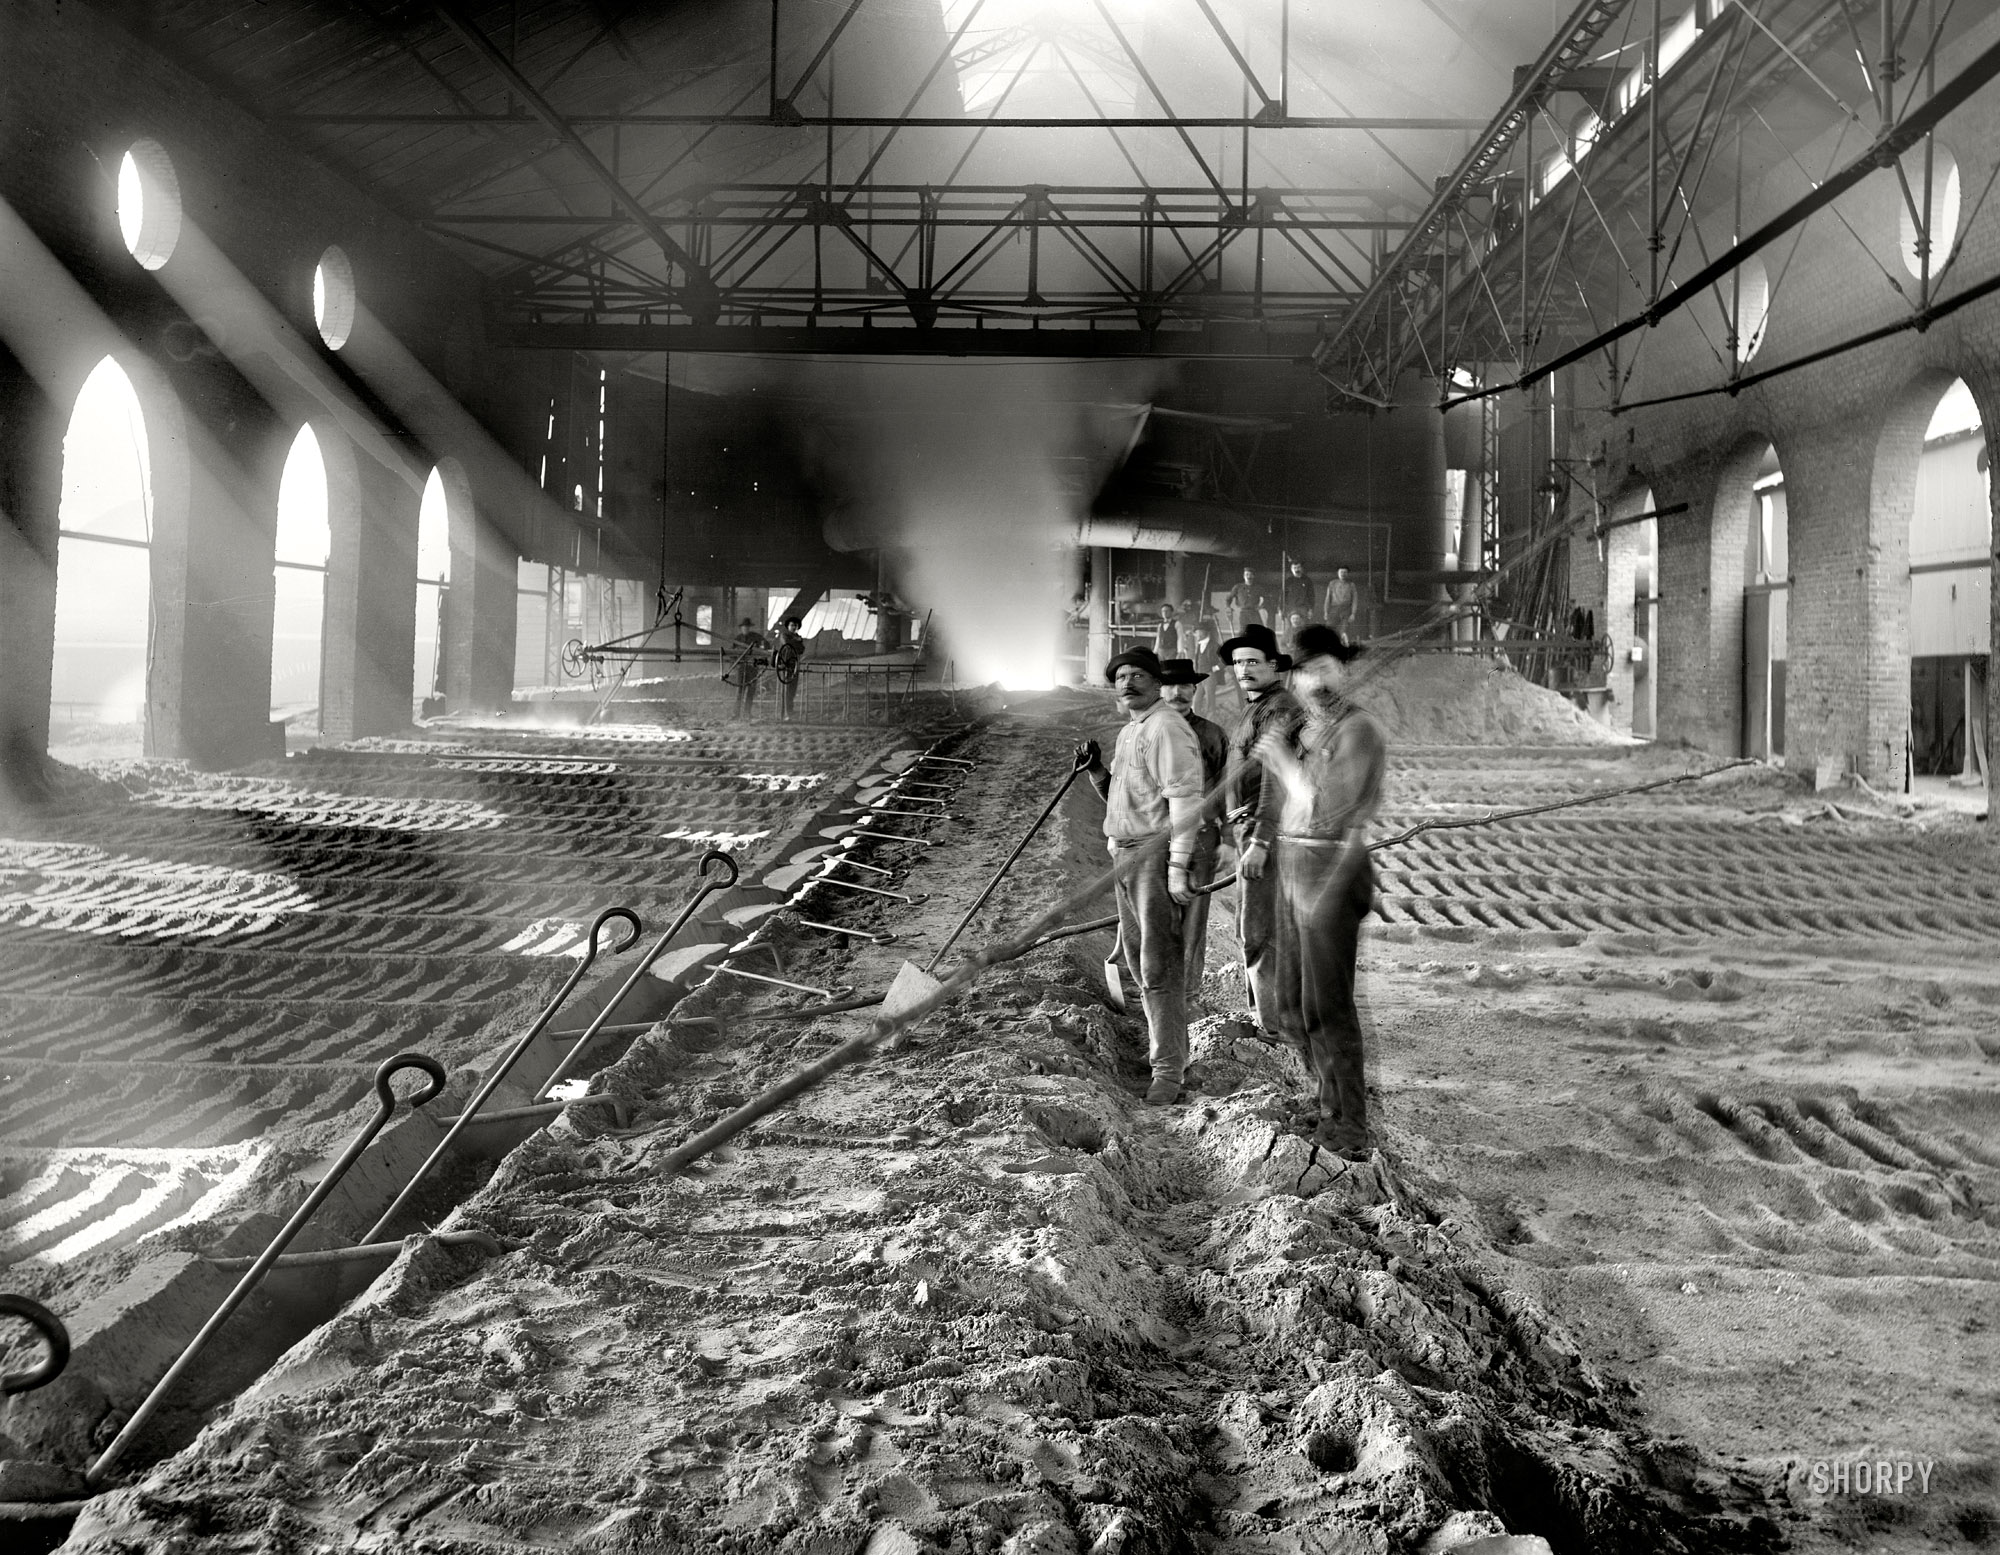 Chicago circa 1901: "Casting pig iron, Iroquois smelter." 8x10 inch dry plate glass negative, Detroit Publishing Company. View full size.